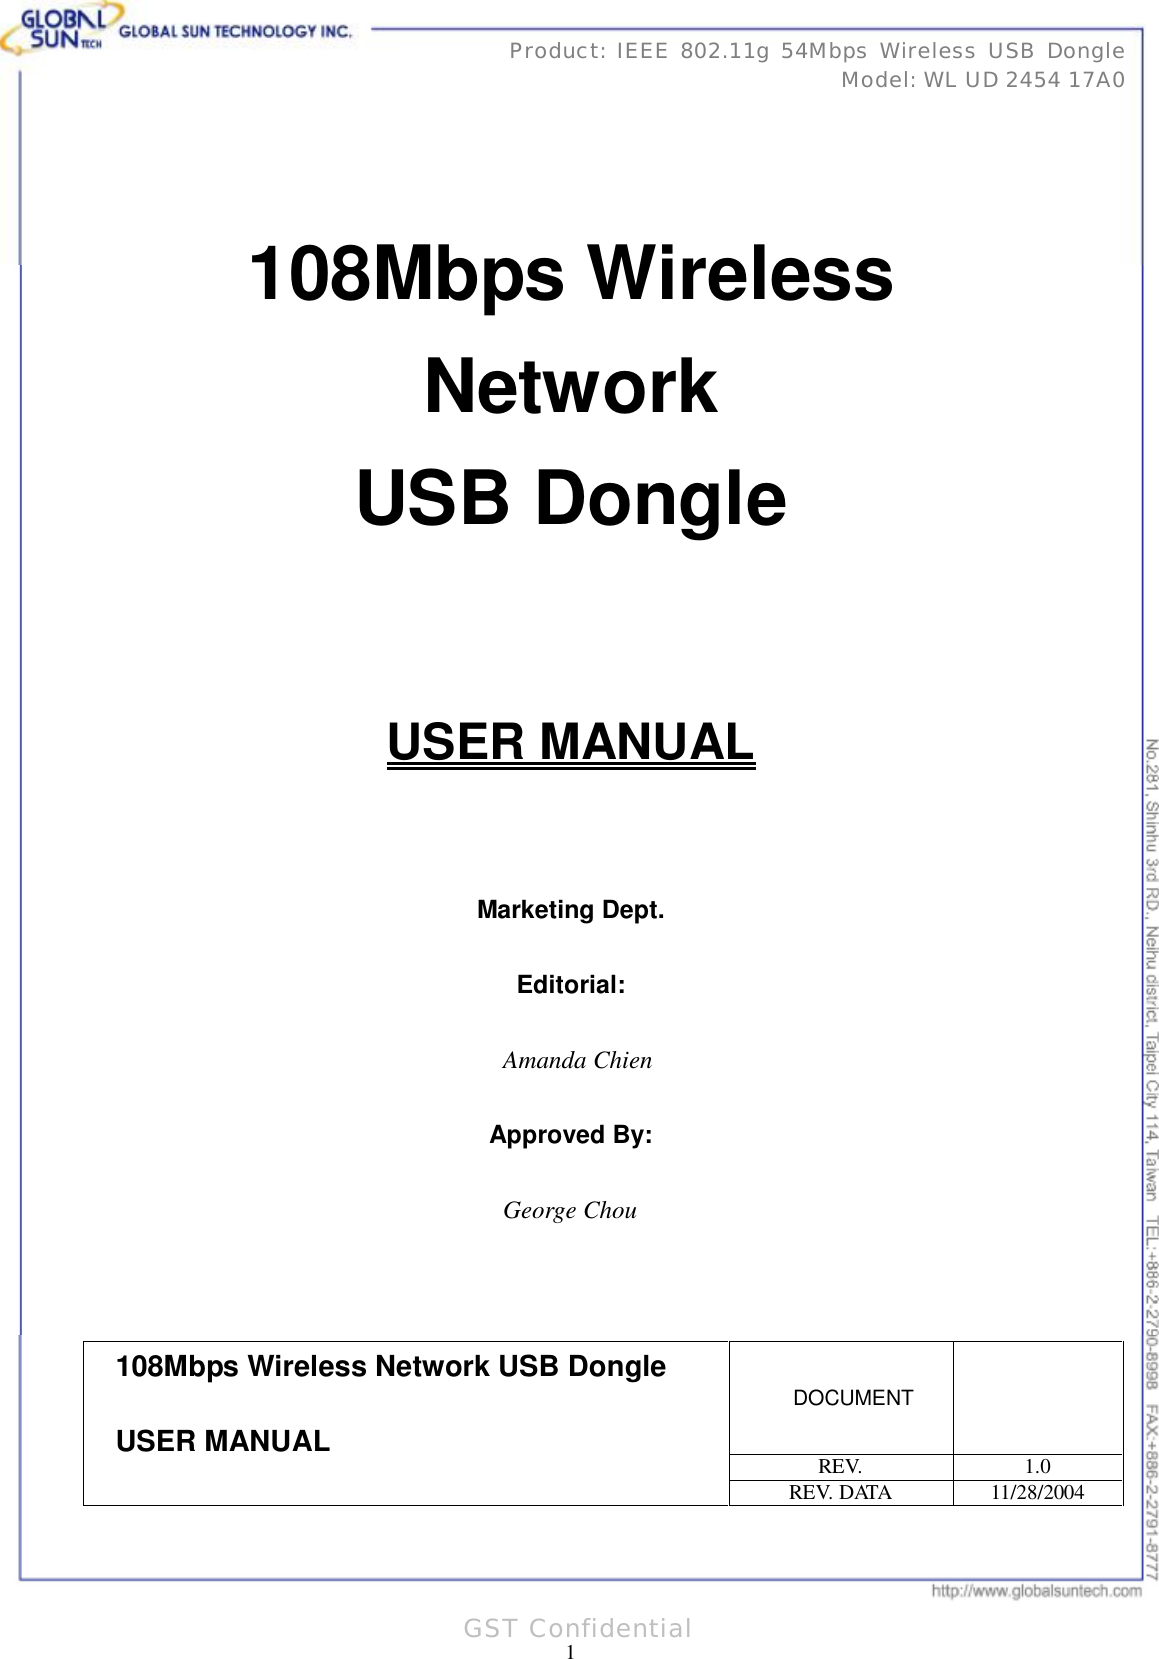      31 1 Product: IEEE 802.11g 54Mbps Wireless USB Dongle Model: WL UD 2454 17A0 GST Confidential    108Mbps Wireless Network USB Dongle   USER MANUAL    Marketing Dept.  Editorial:  Amanda Chien  Approved By:  George Chou    DOCUMENT  REV.  1.0 108Mbps Wireless Network USB Dongle USER MANUAL REV. DATA  11/28/2004 